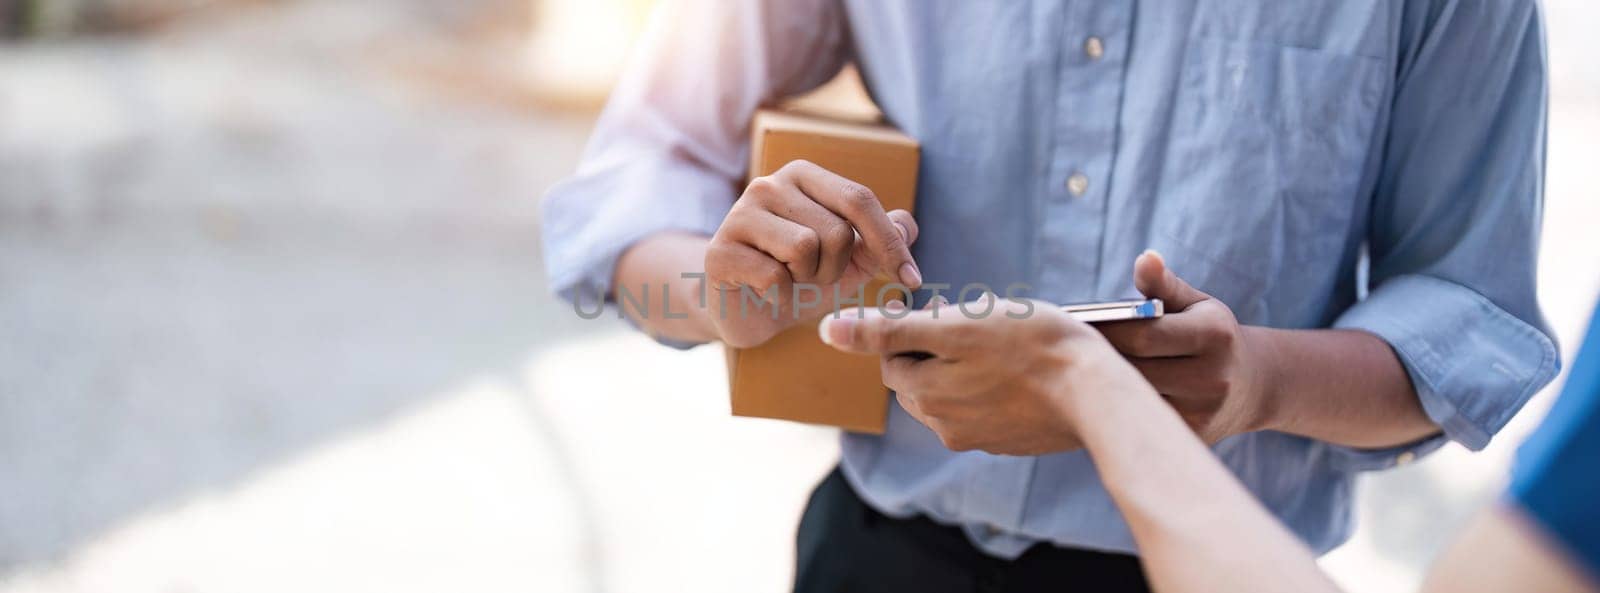 customer signature in mobile phone, man receiving parcel box from courier with delivery service man, express delivery, online shopping concept.